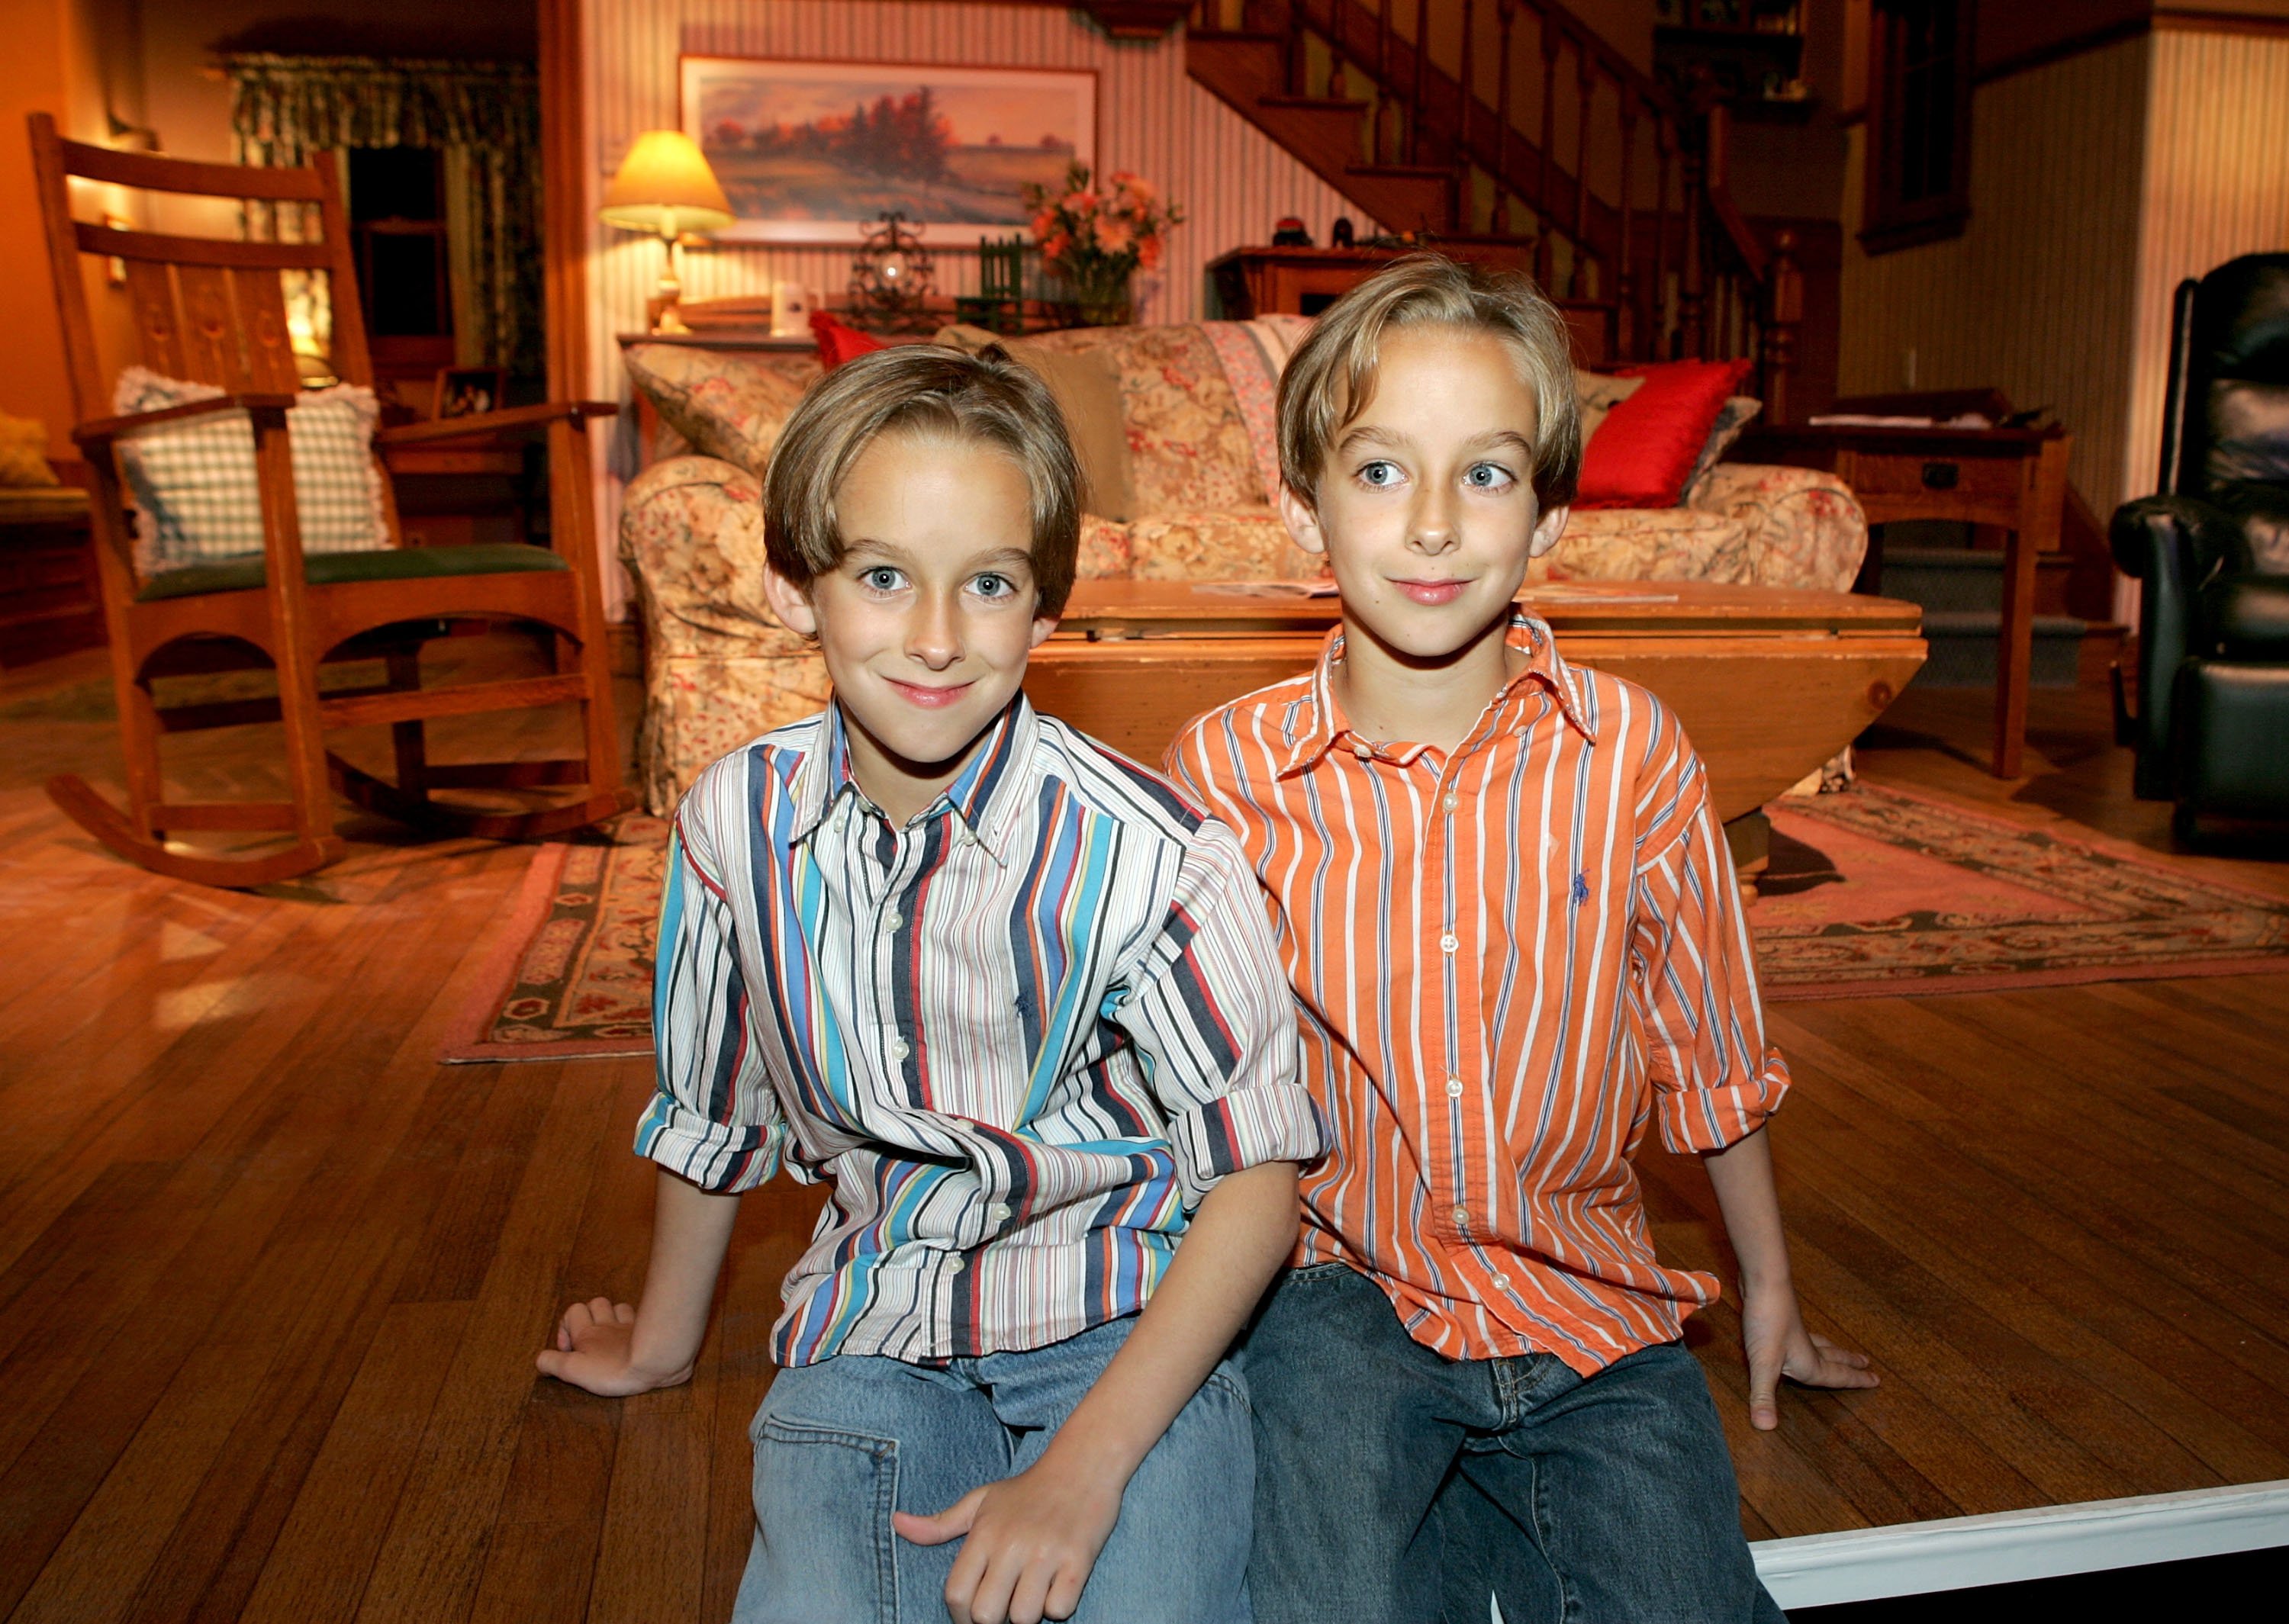 Actors Sullivan Sweeten and Sawyer Sweeten at the Everybody Loves Raymond Series Wrap Party at Hanger 8 on April 28, 2005 in Santa Monica, California. | Source: Getty Images